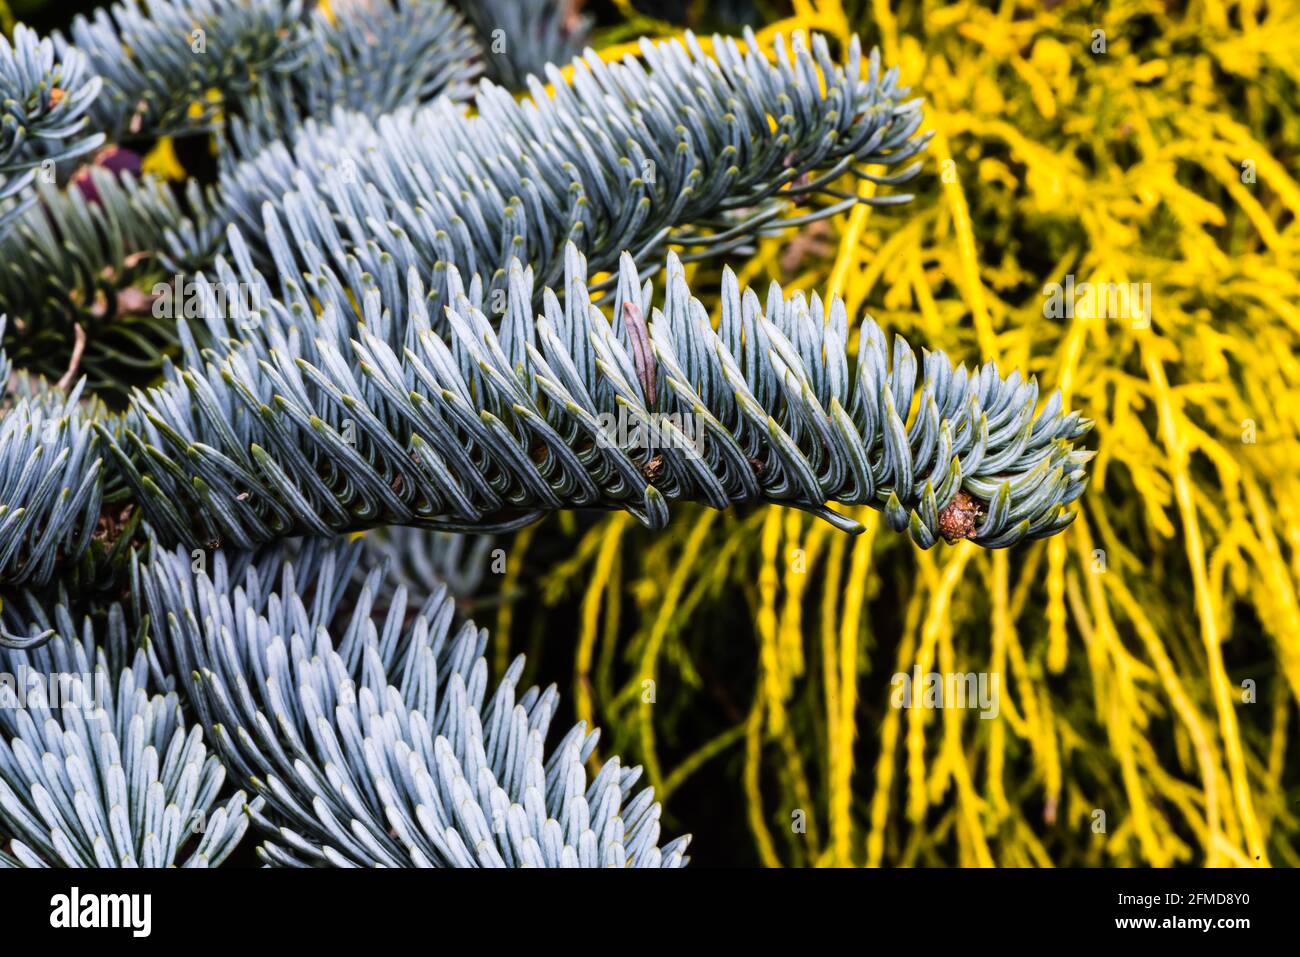 Abies Procera Glauca Prostrata, growing in a Country Garden. Stock Photo